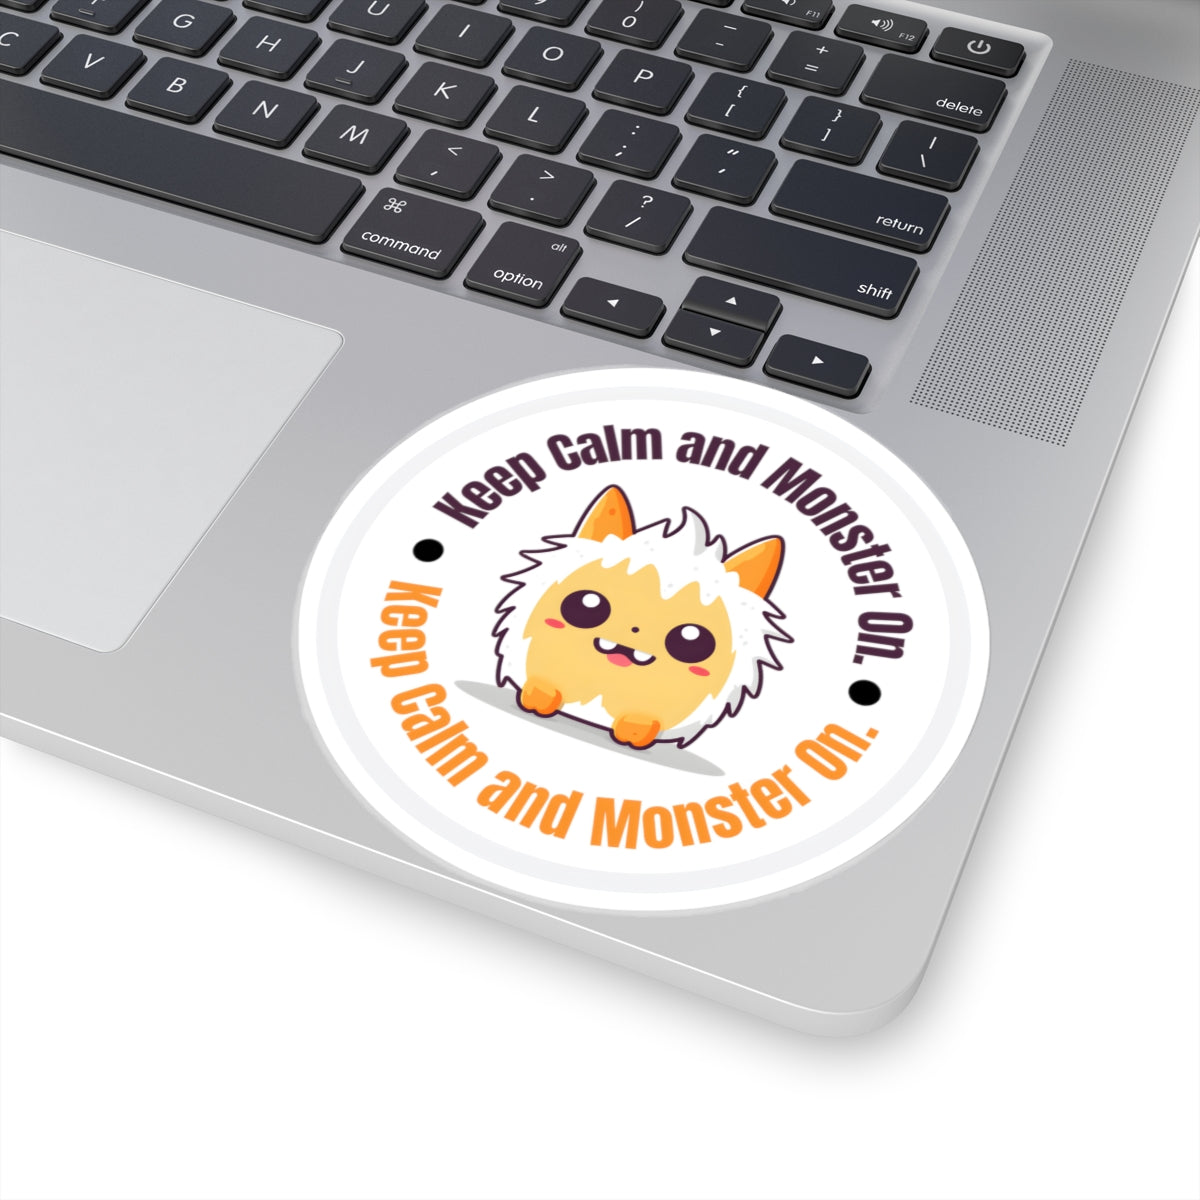 Keep calm and monster on Kiss-cut Stickers